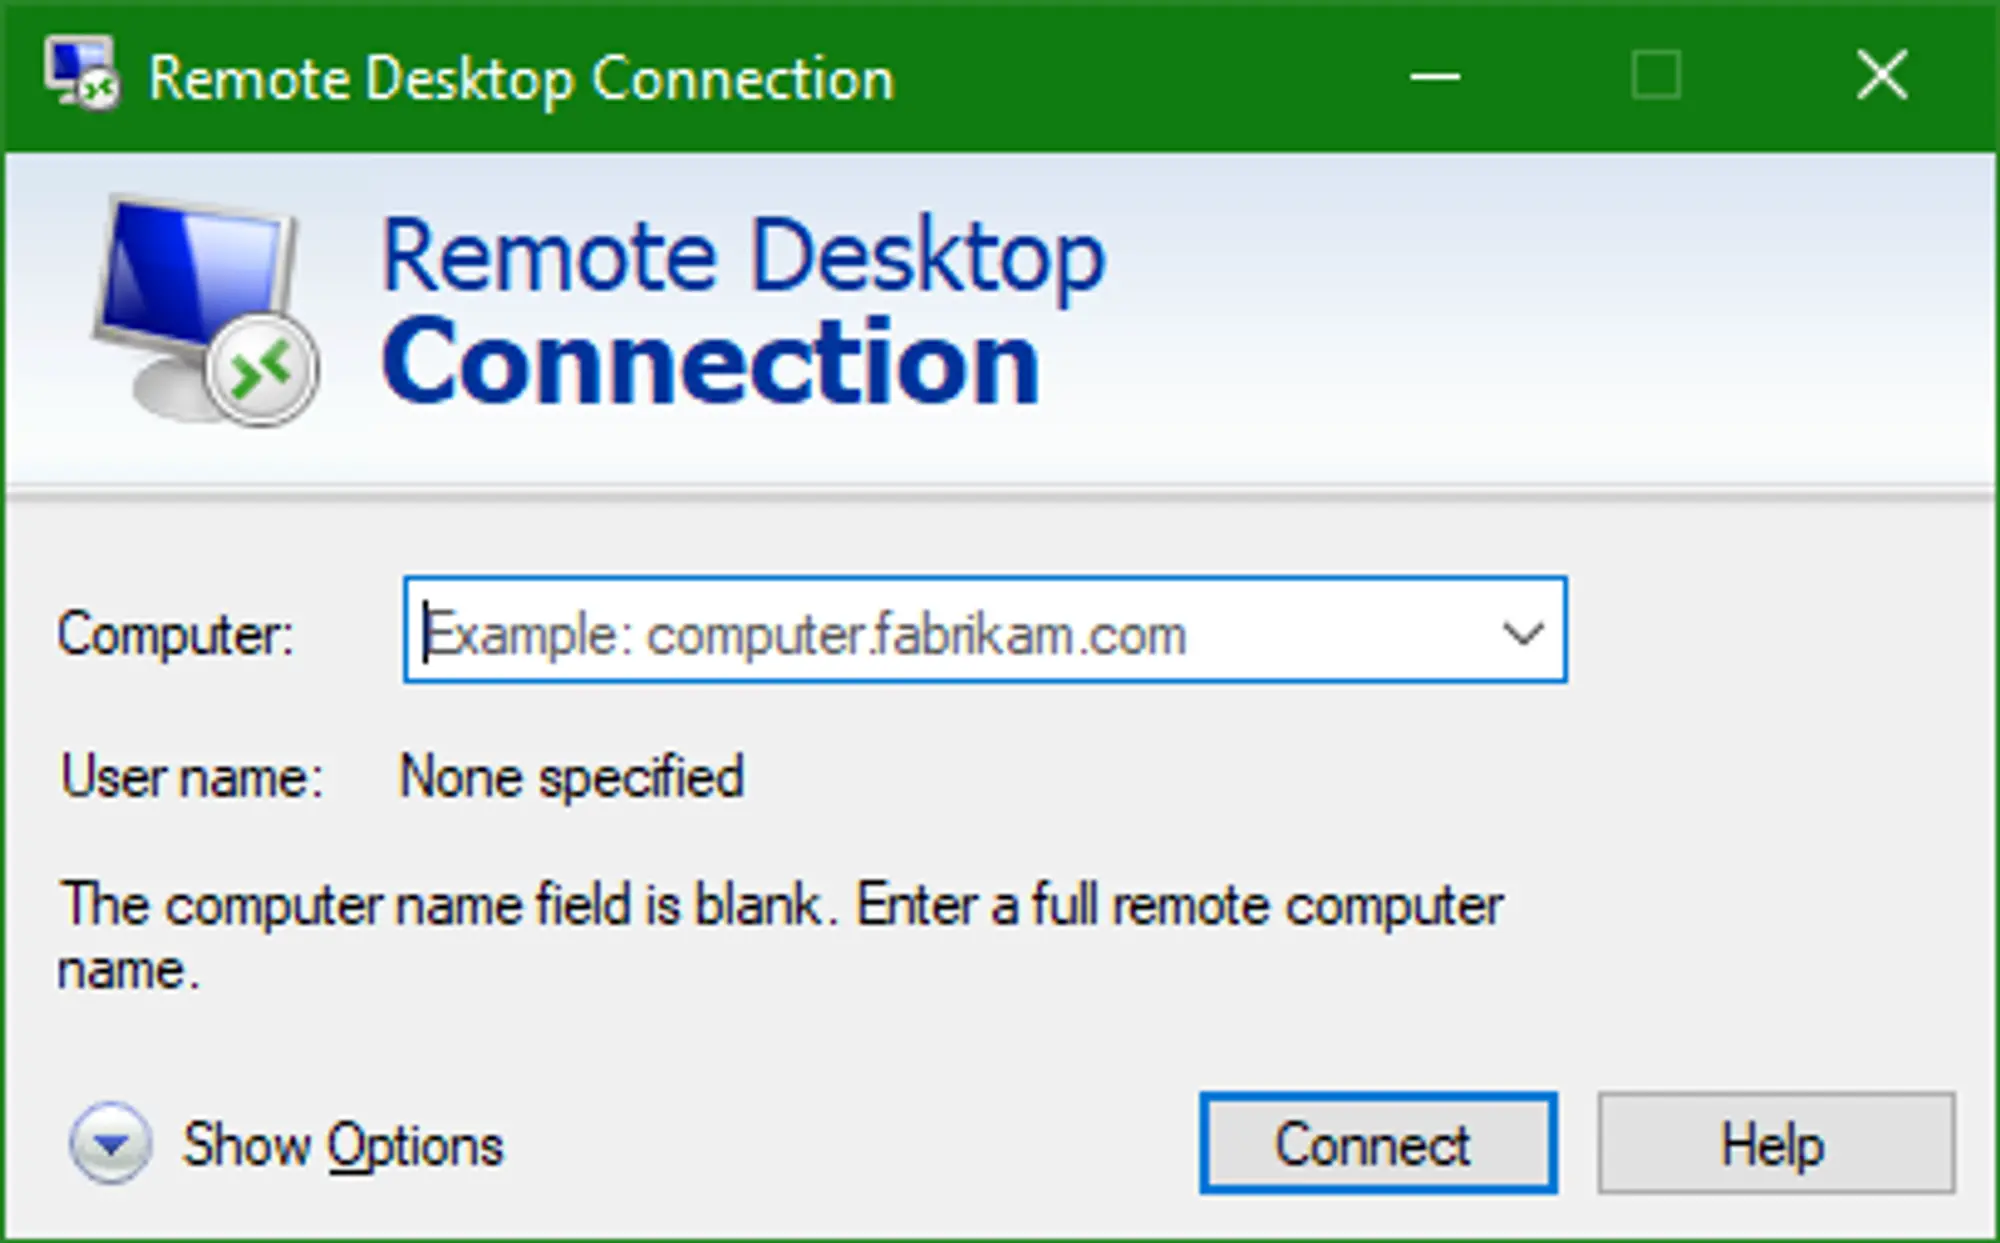 The Windows Remote Desktop Connection application with the computer text field / drop down selected and empty. There are two buttons at the bottom, “Connect” and “Help” with a “Show Options” toggle on the bottom right.